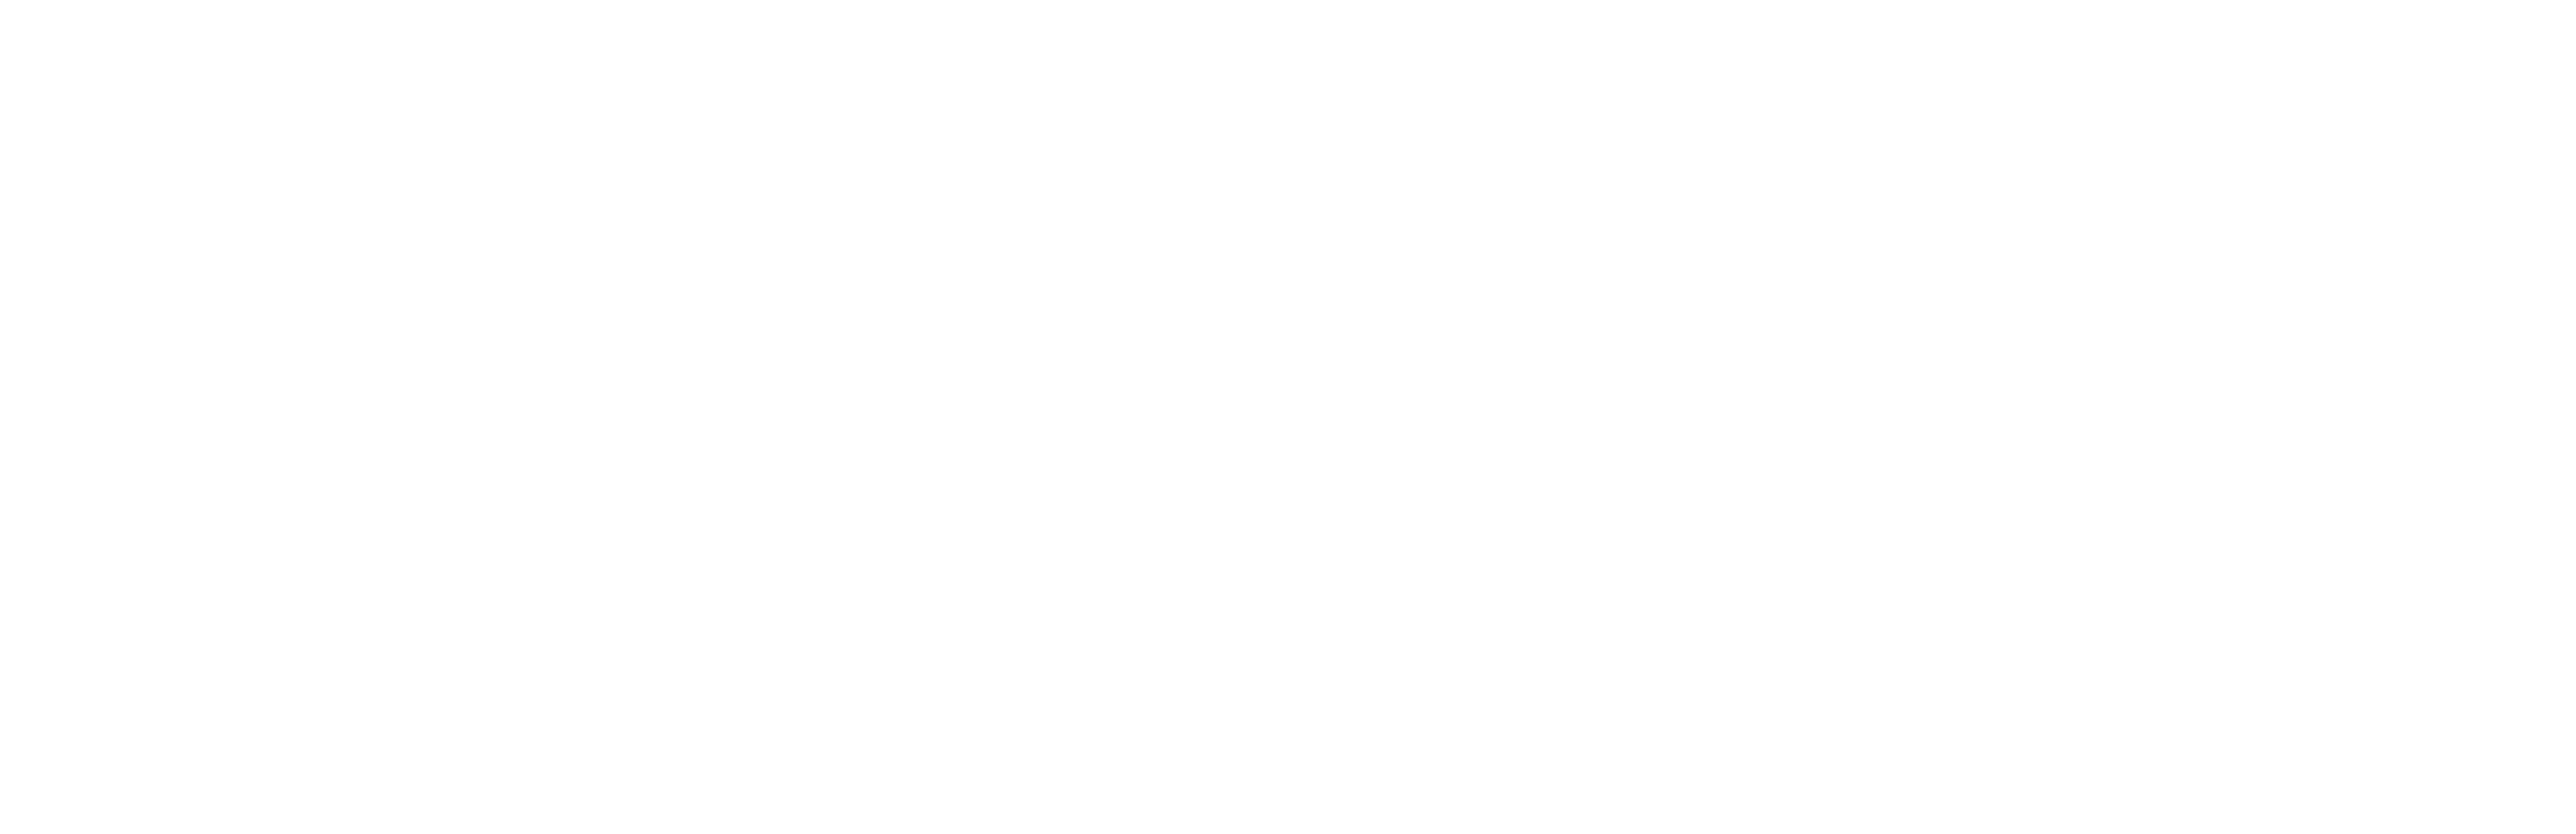 The RE/MAX Commercial white logo